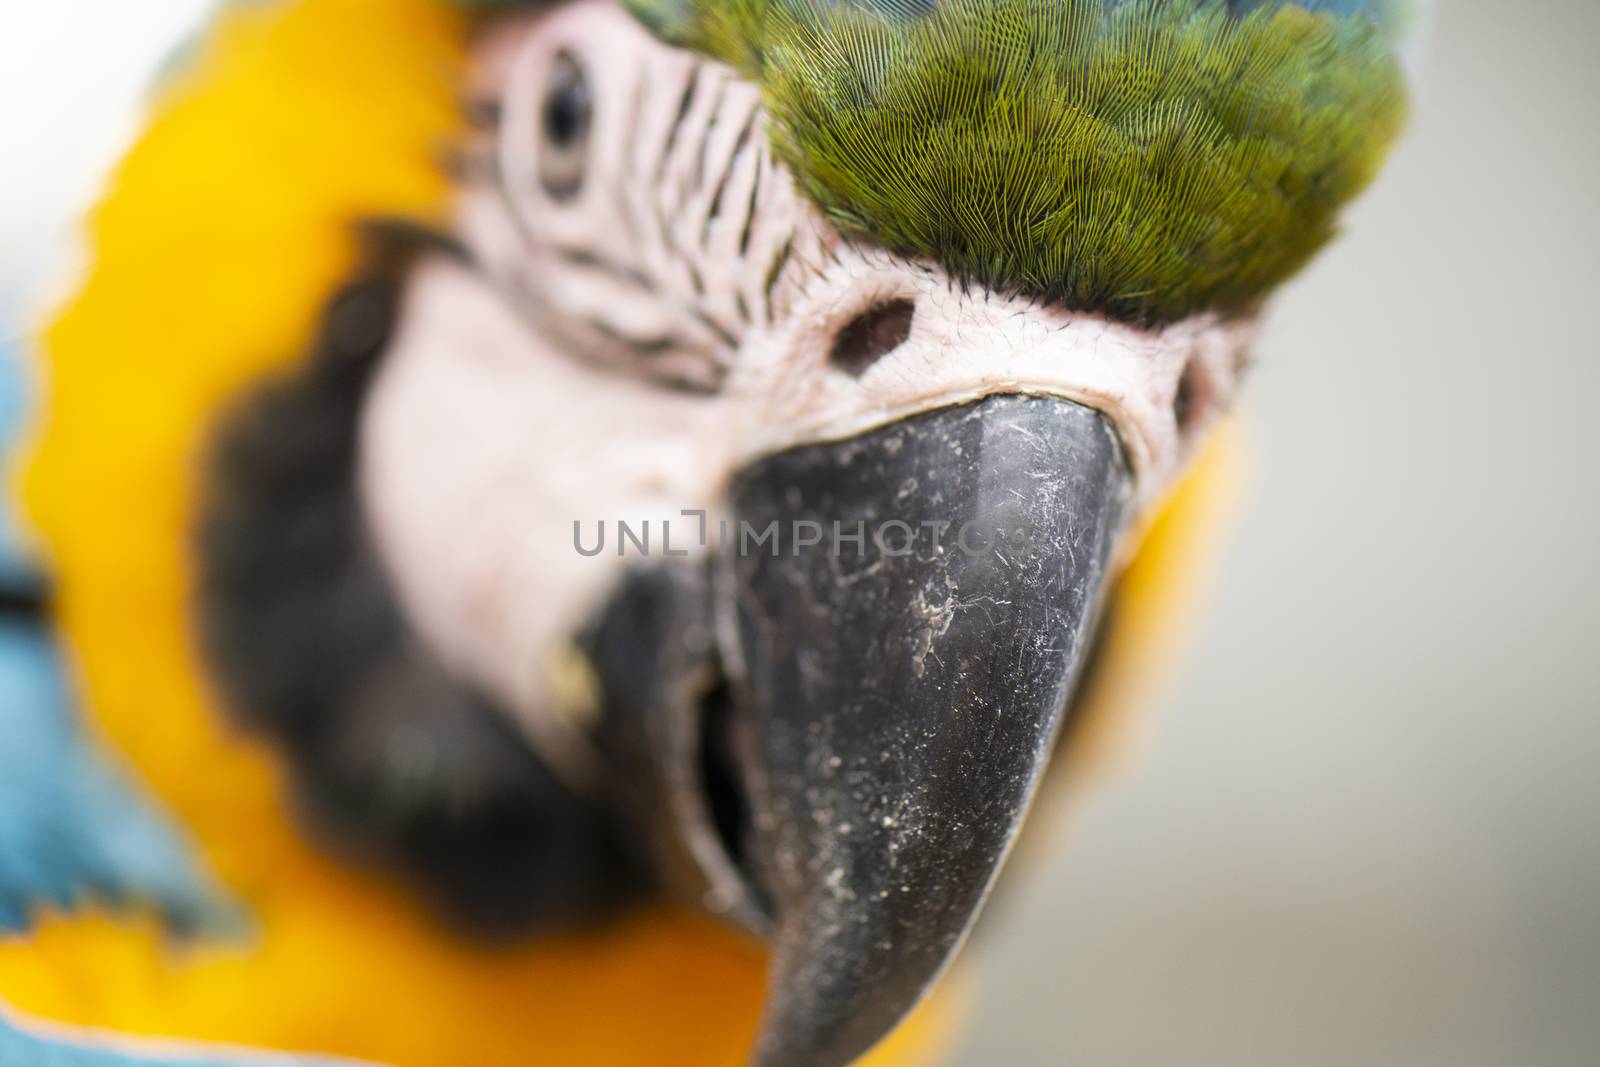 Close up of the macaw bird. by artistrobd